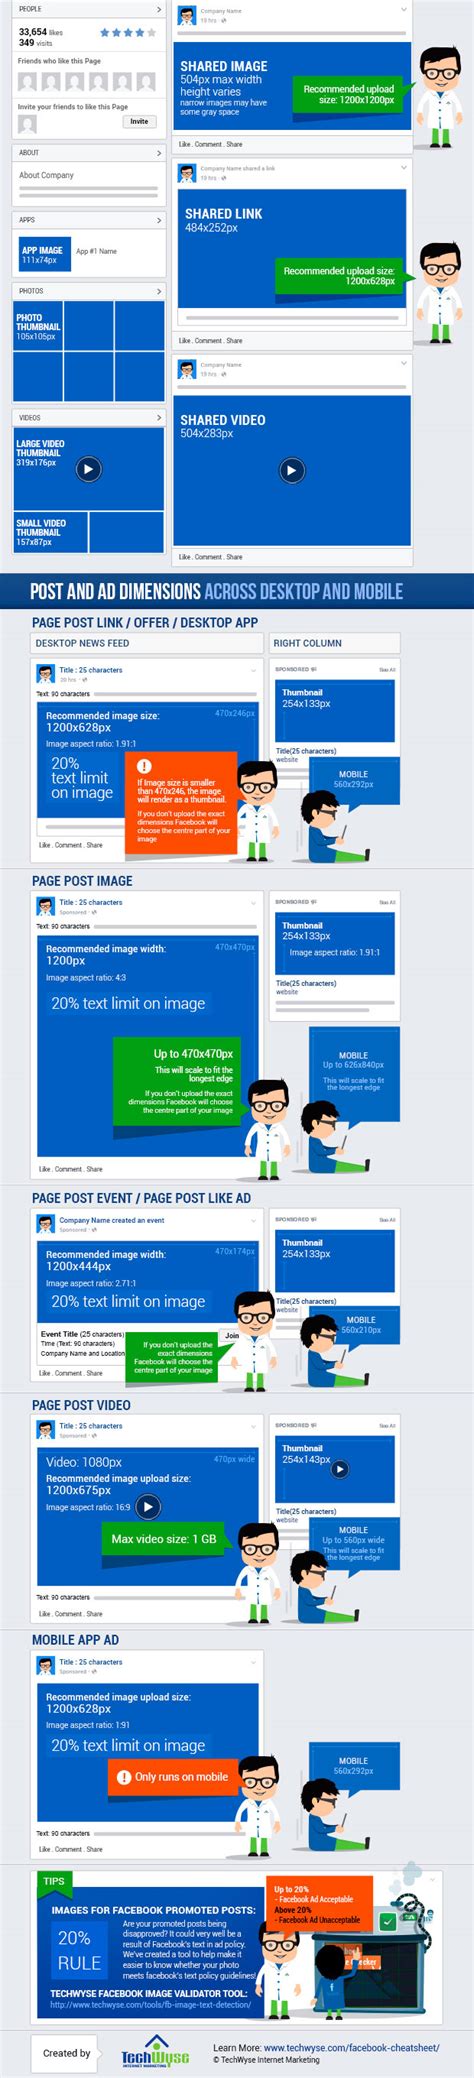 Facebook Cheat Sheet Image Size And Dimensions Infographic Reverasite